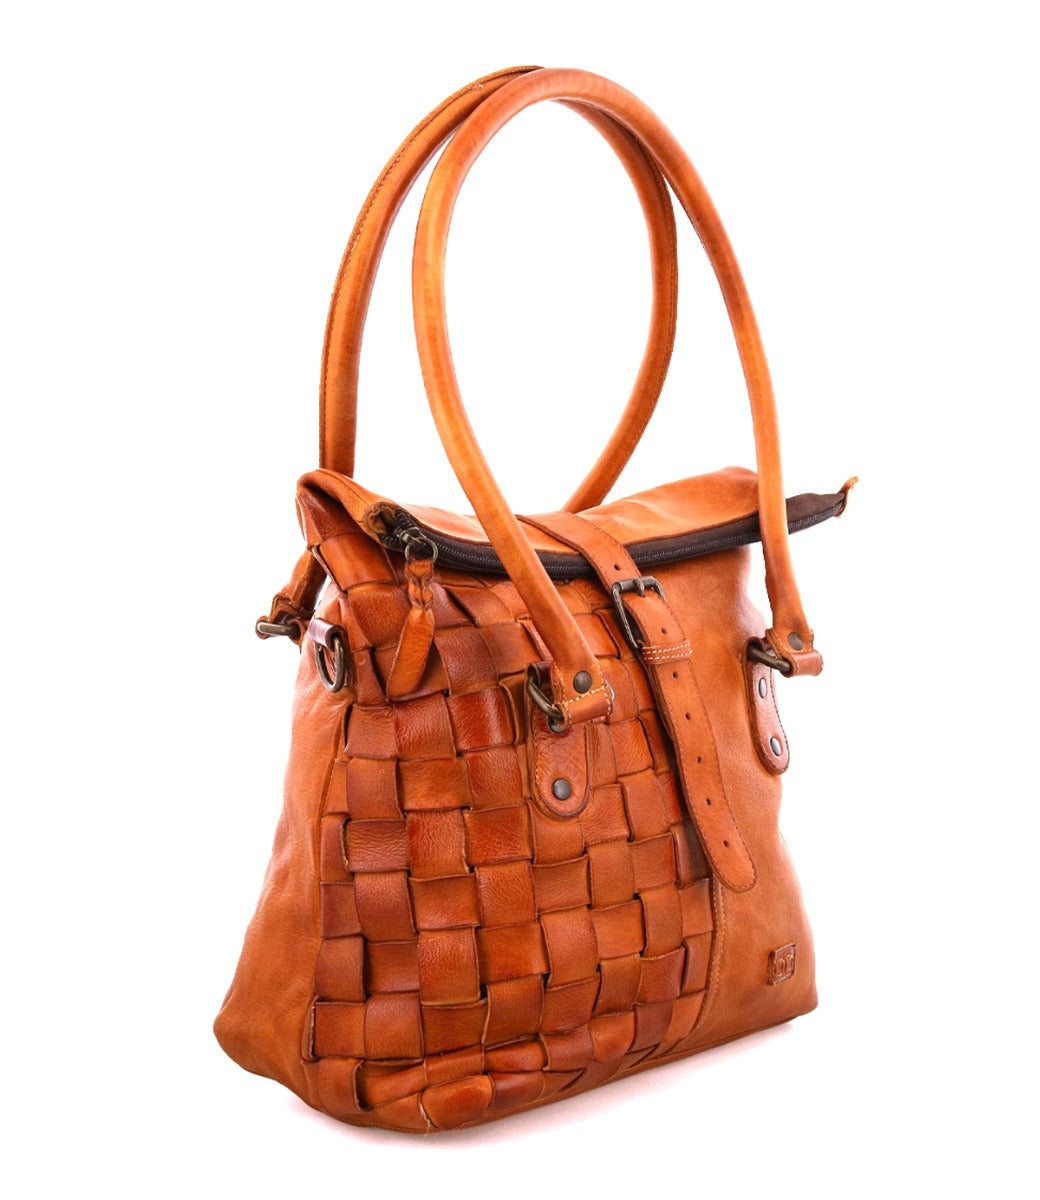 A Rachel leather handbag with woven handles by Bed Stu.